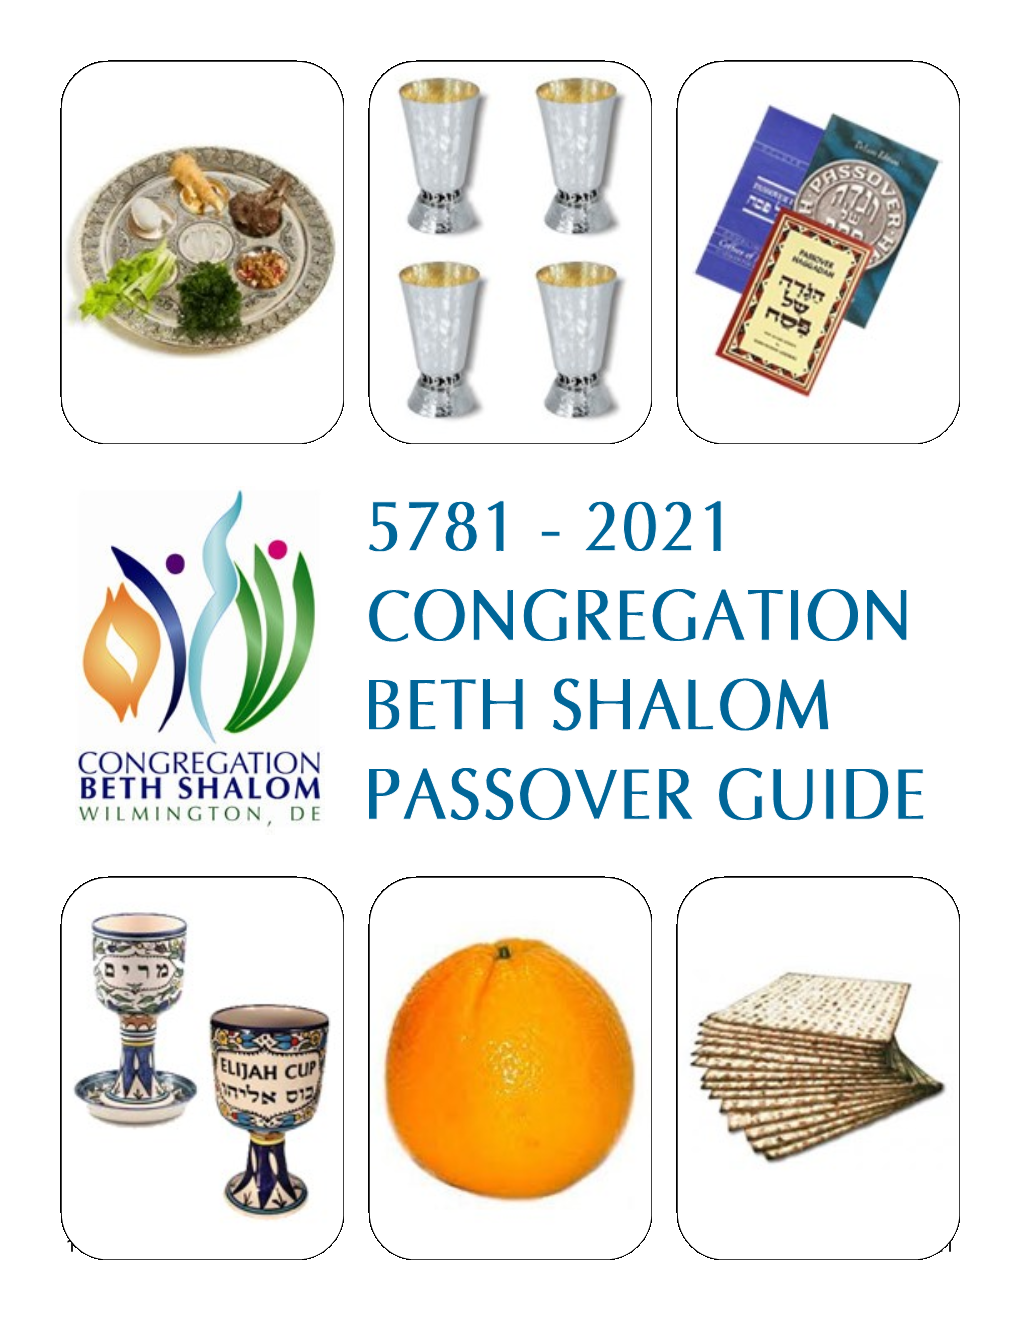 1 Passover Guide 2021 March 2021 So… What’S New in 2021? Have Toyed with Rigging up Their Webcams to Try Again the Idea of Doing a Seder Via Skype Or Zoom Or Facetime